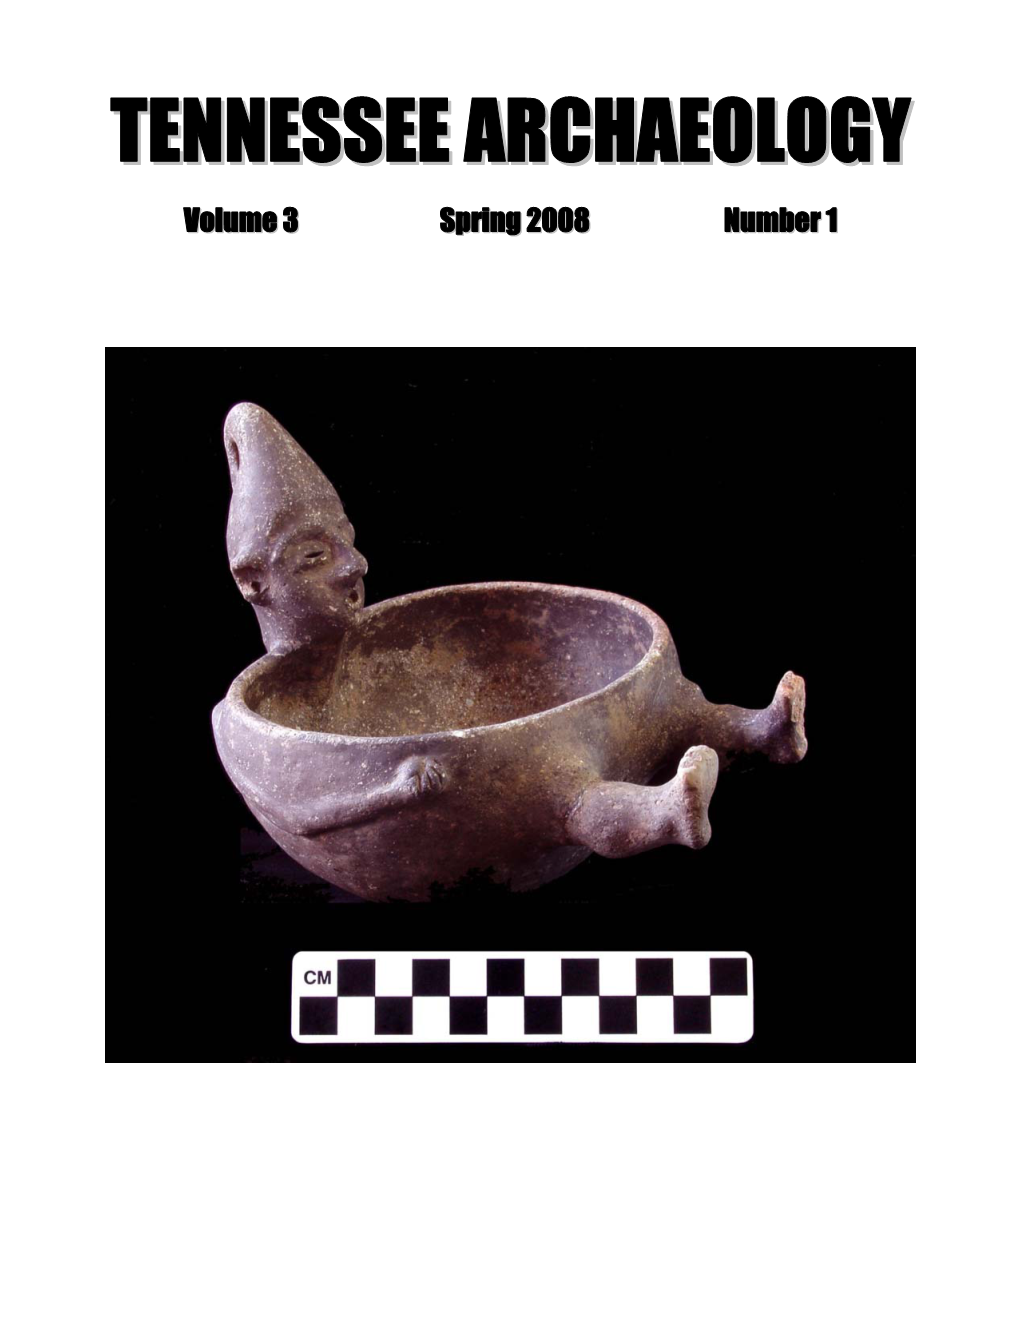 Tennessee Archaeology Is Published Semi-Annually in Electronic Print Format by the Tennessee Council for Professional Archaeology